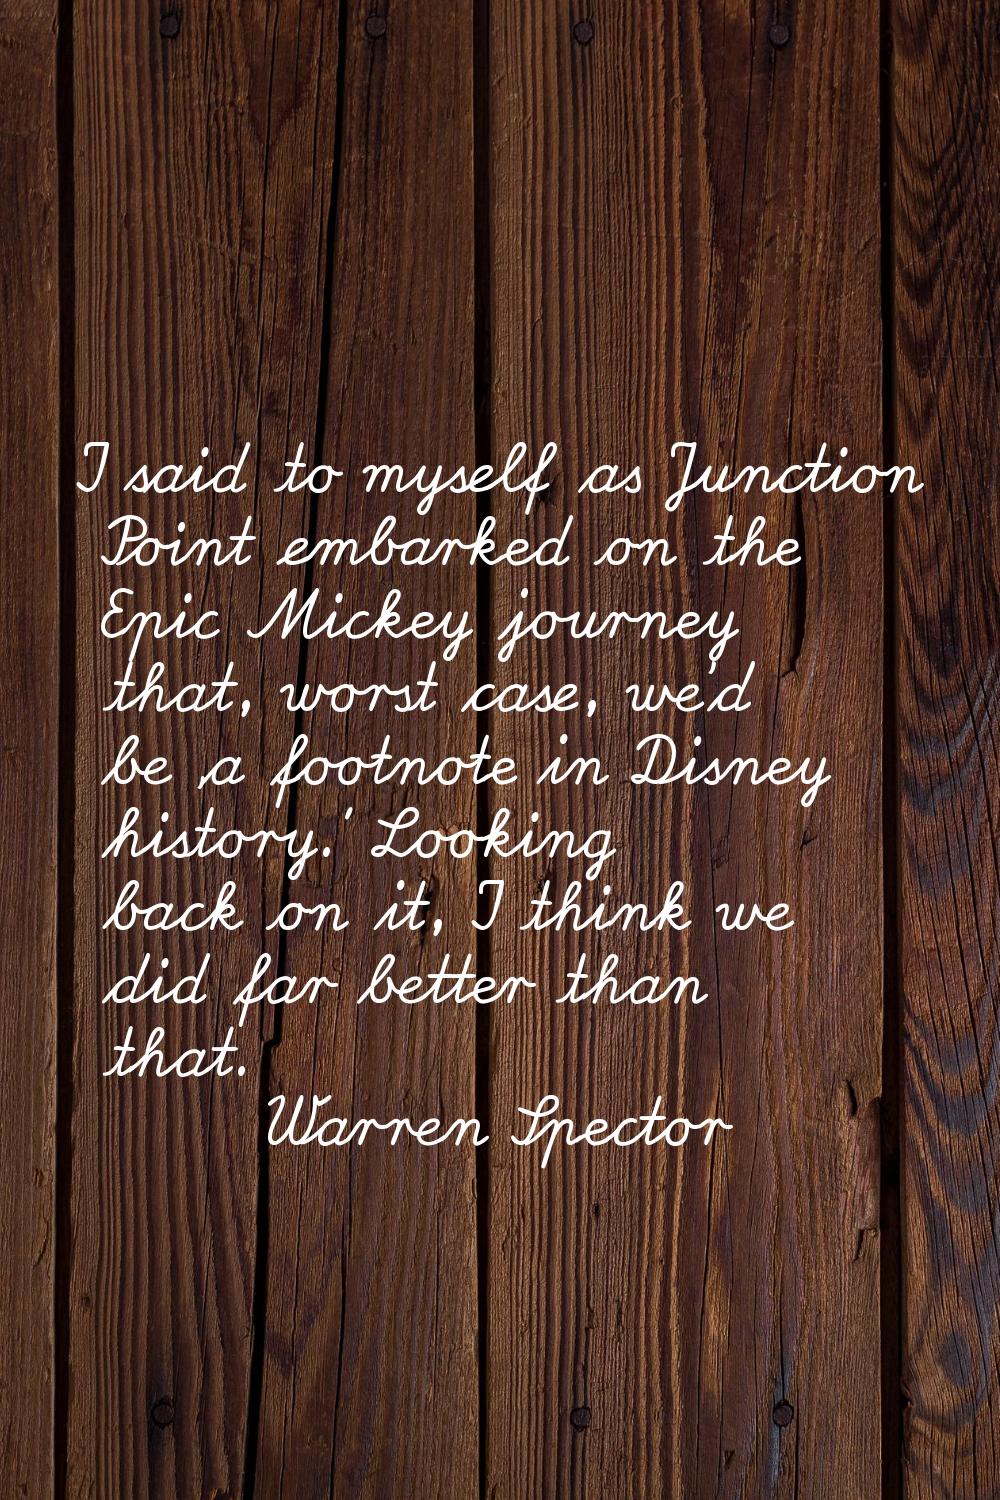 I said to myself as Junction Point embarked on the Epic Mickey journey that, worst case, we'd be 'a